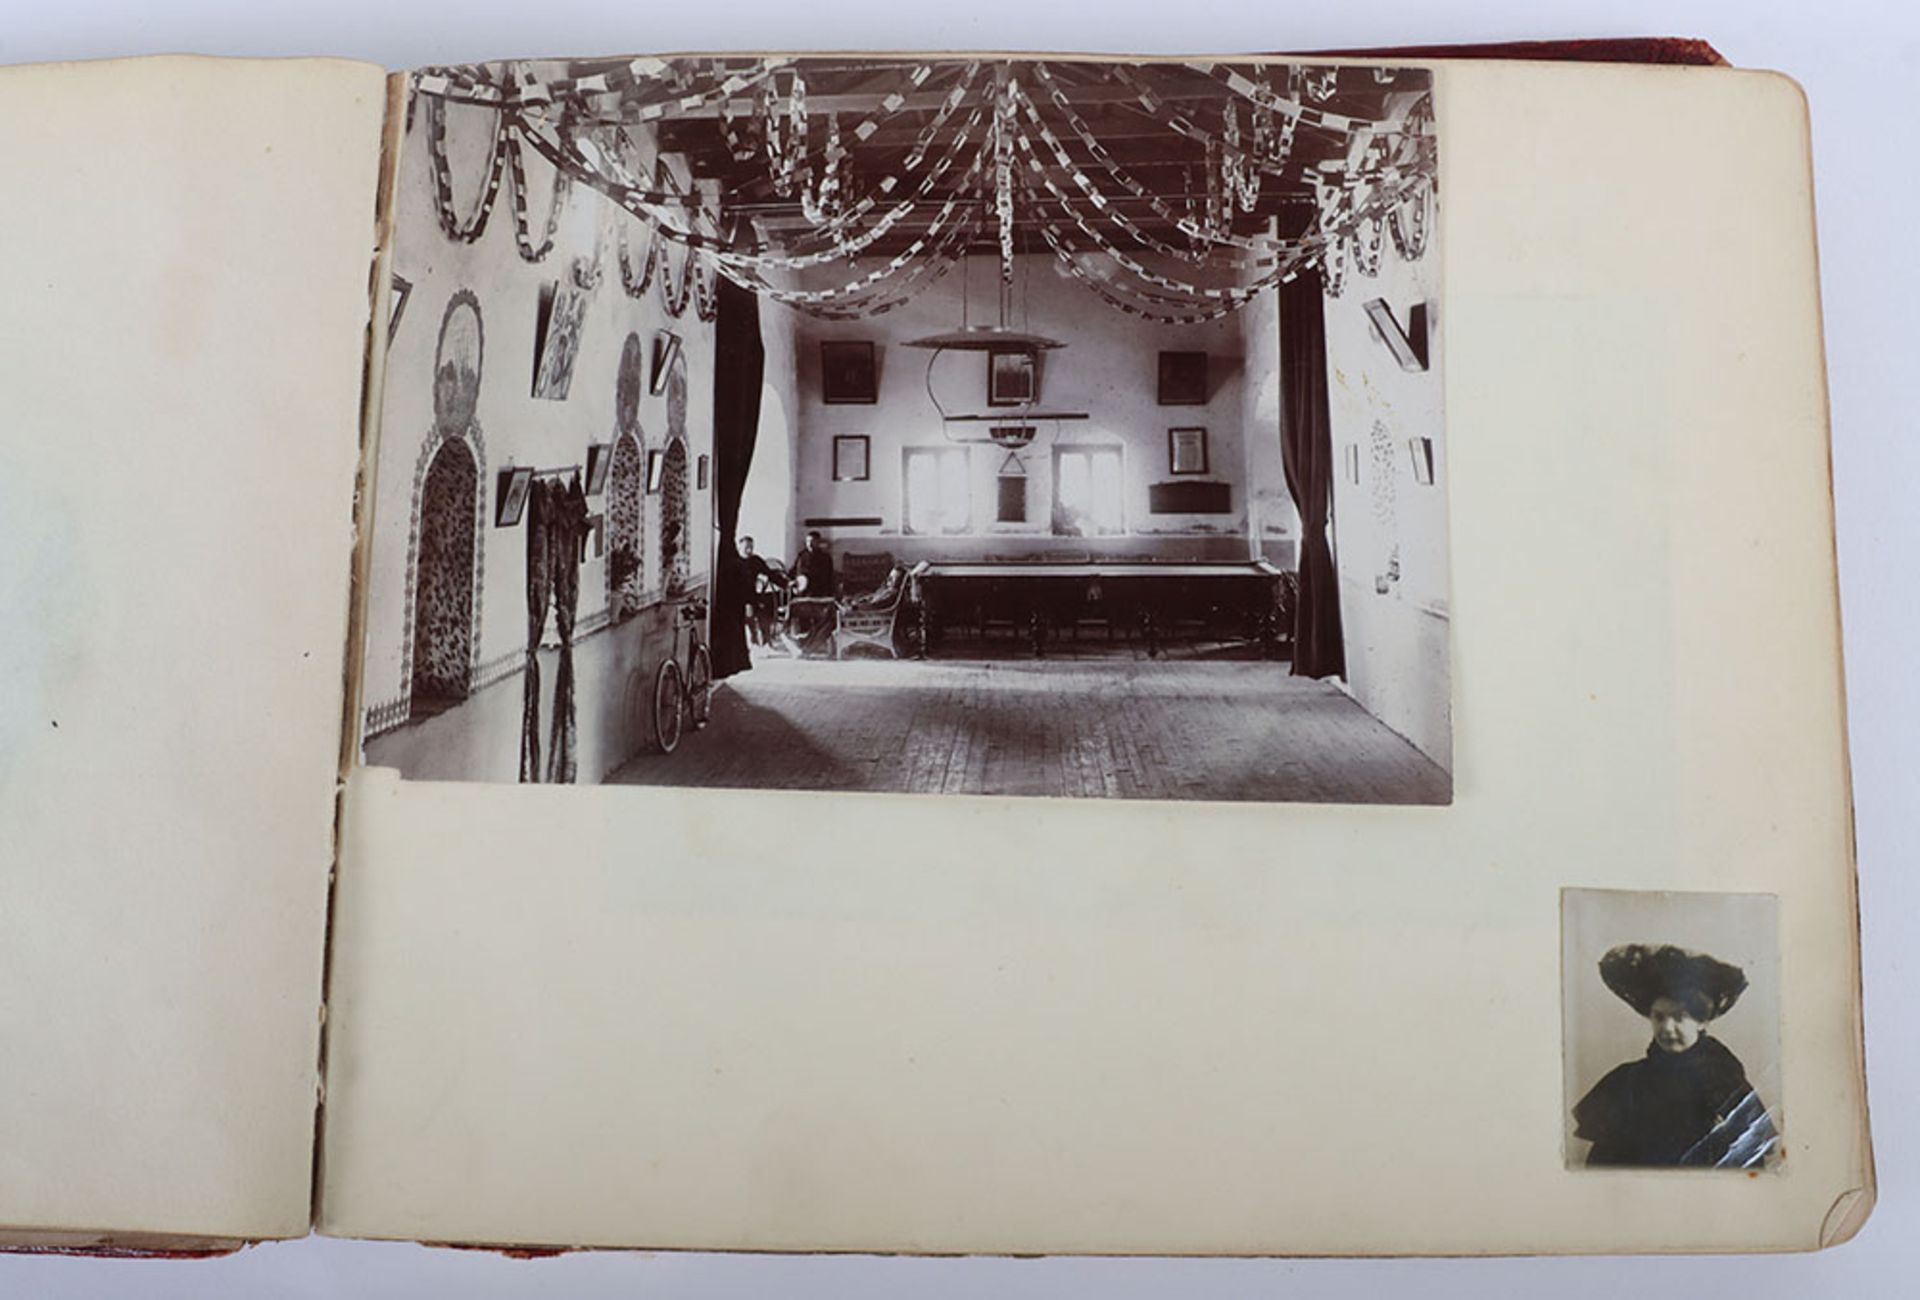 Photograph Album with images of ther Delhi Durbar, troops lining streets, Elephants, sacred cows bel - Image 11 of 48